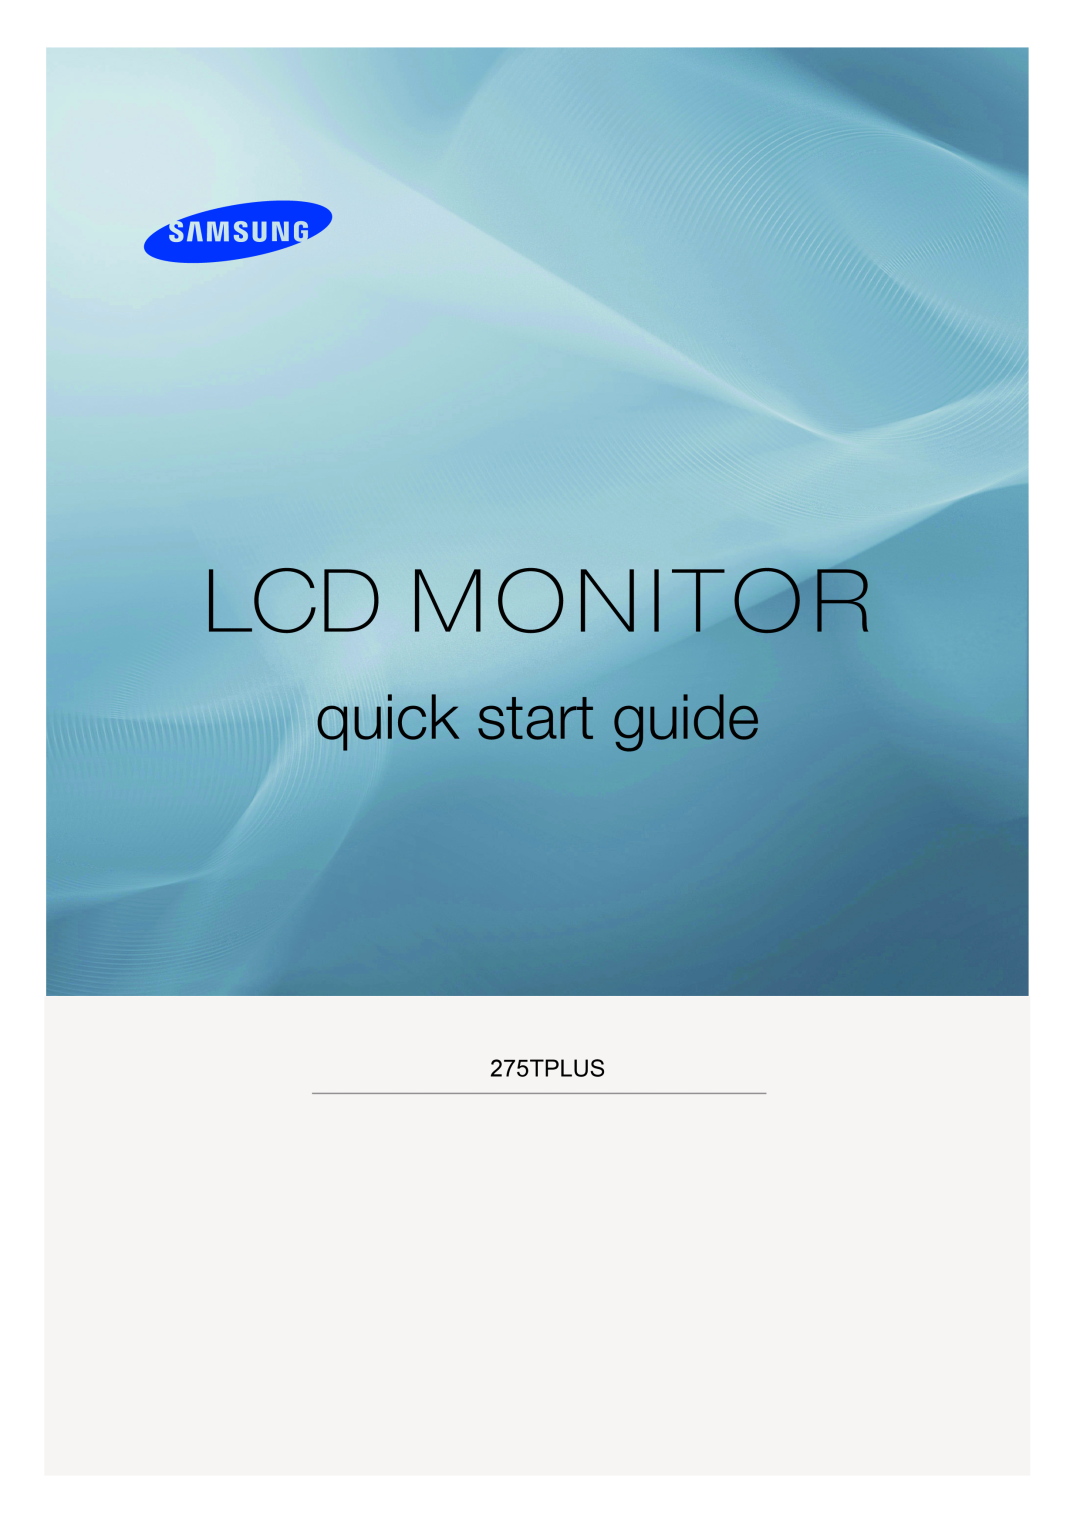 Samsung 275TPLUS quick start Lcd Monitor, quick start guide 